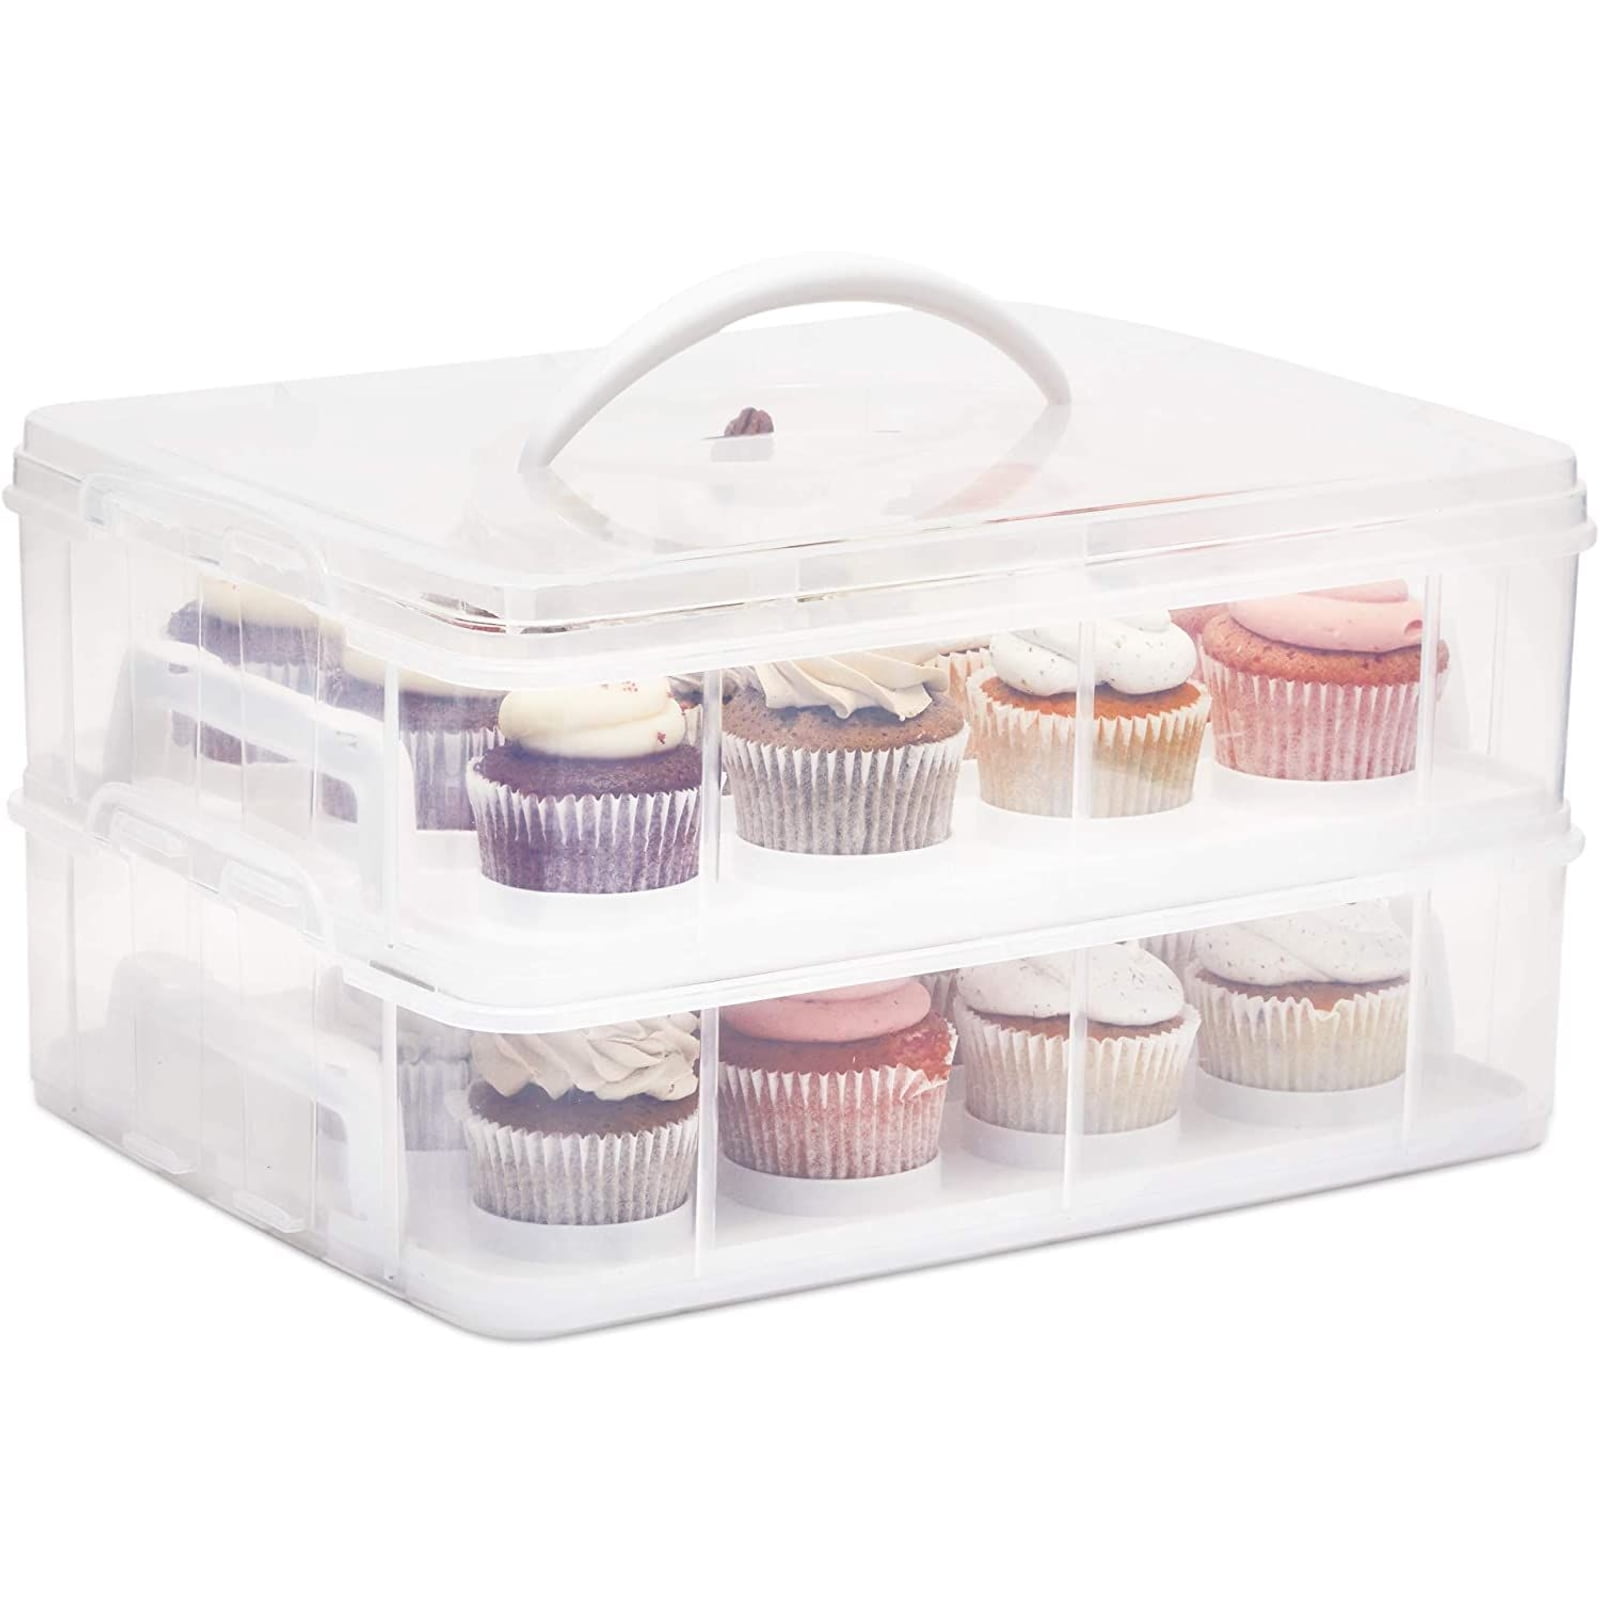 2-X Red Reusable Cupcake Muffin Carrier Container Caddy Handle BPA free.